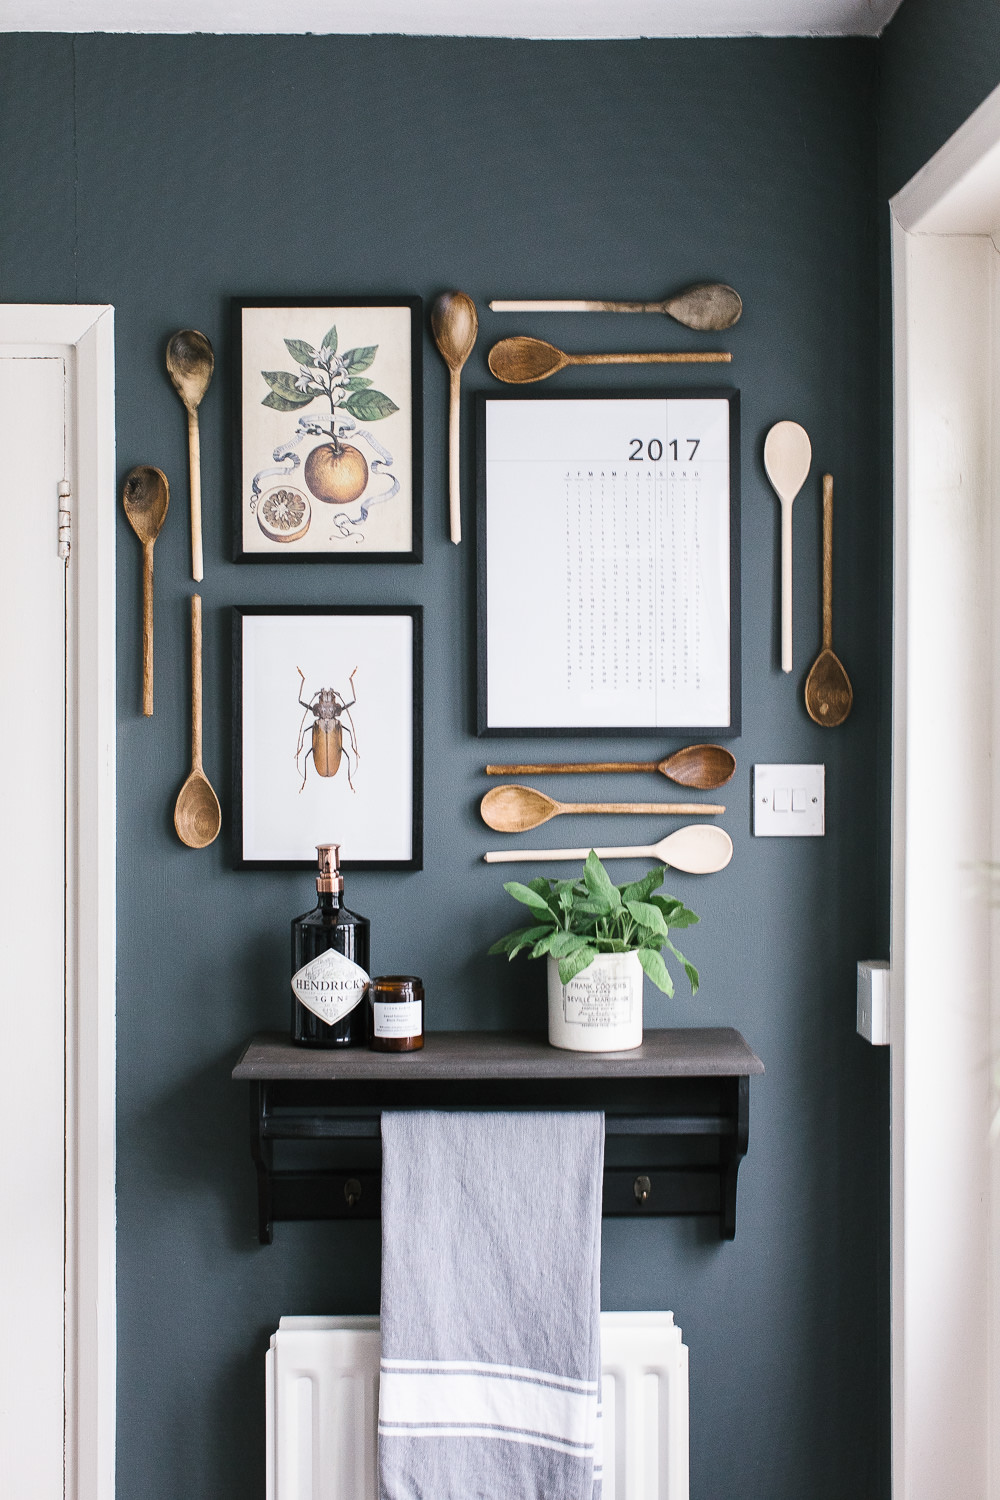 Gallery wall with art and wooden spoons